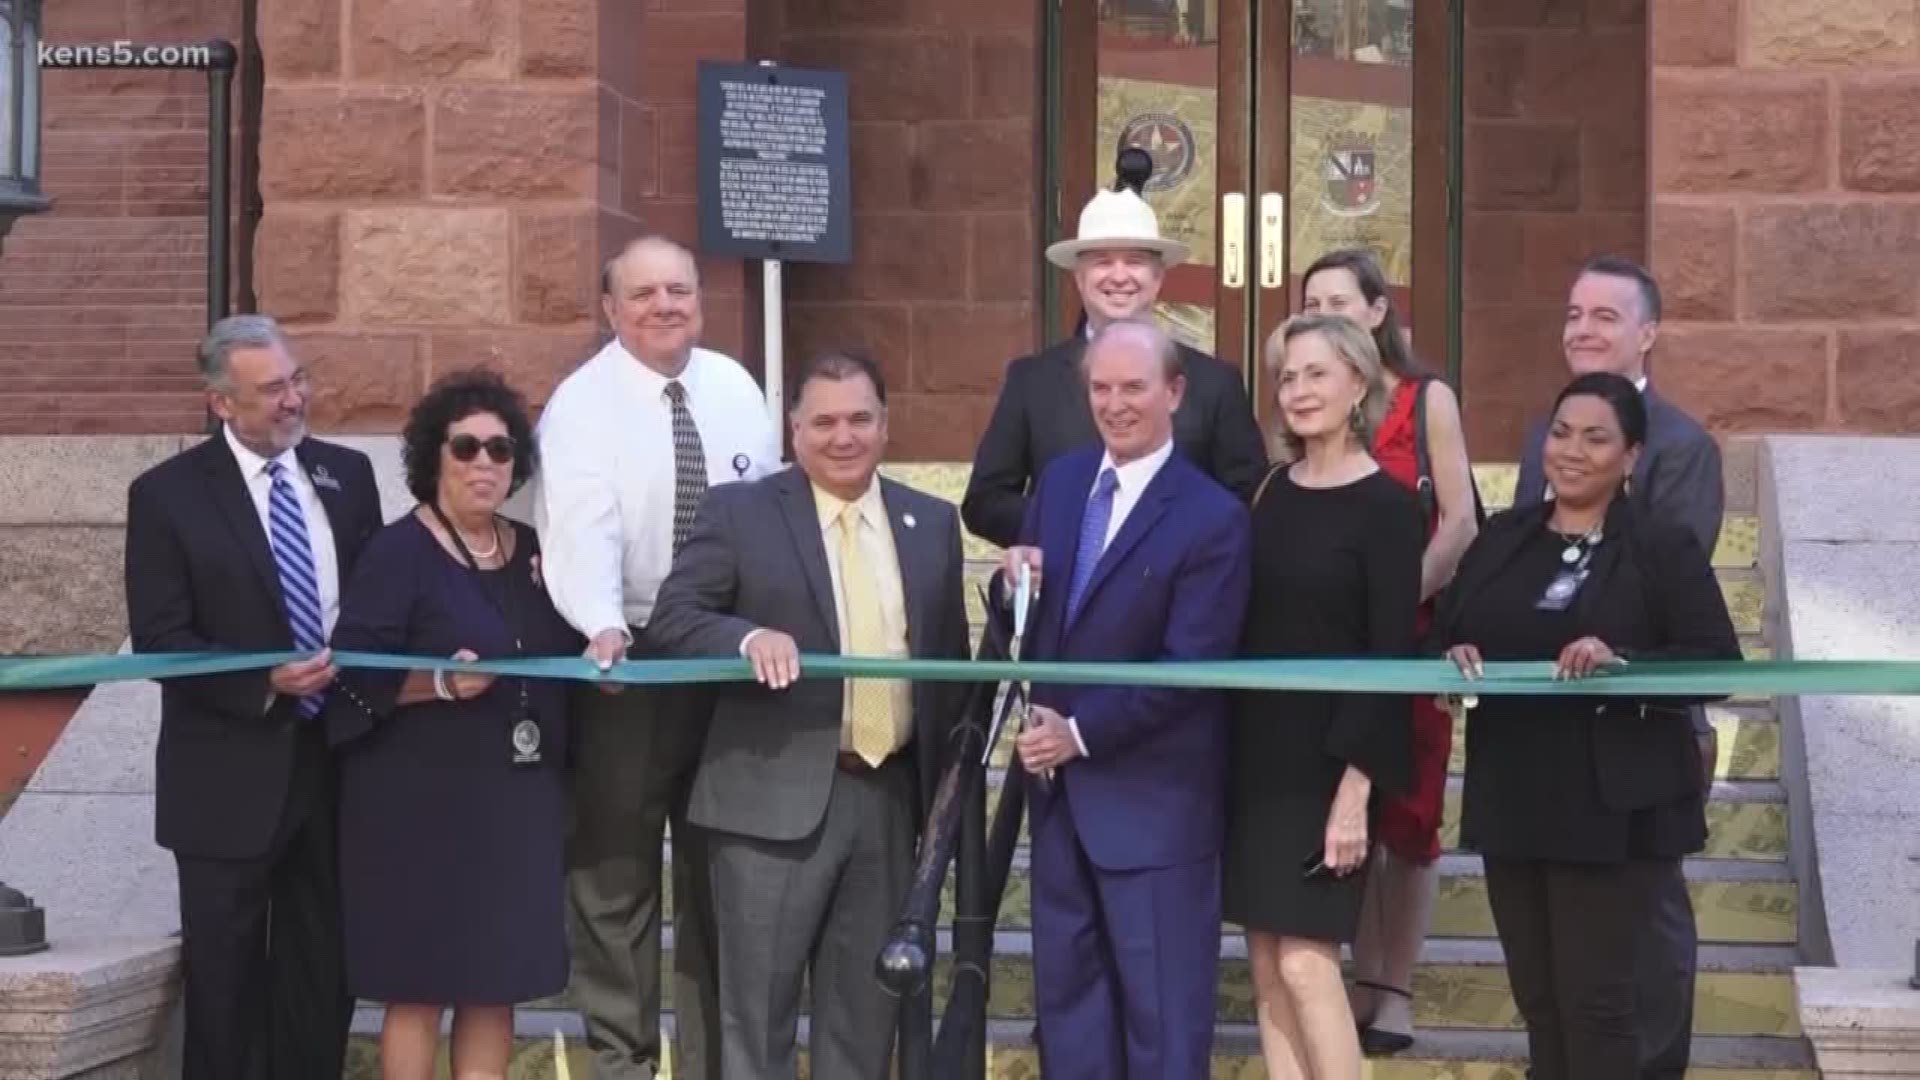 Bexar County opened its new "Bexar Heritage Center" Tuesday. It's open to the public Monday-Friday from 7 a.m.-5:30 p.m.